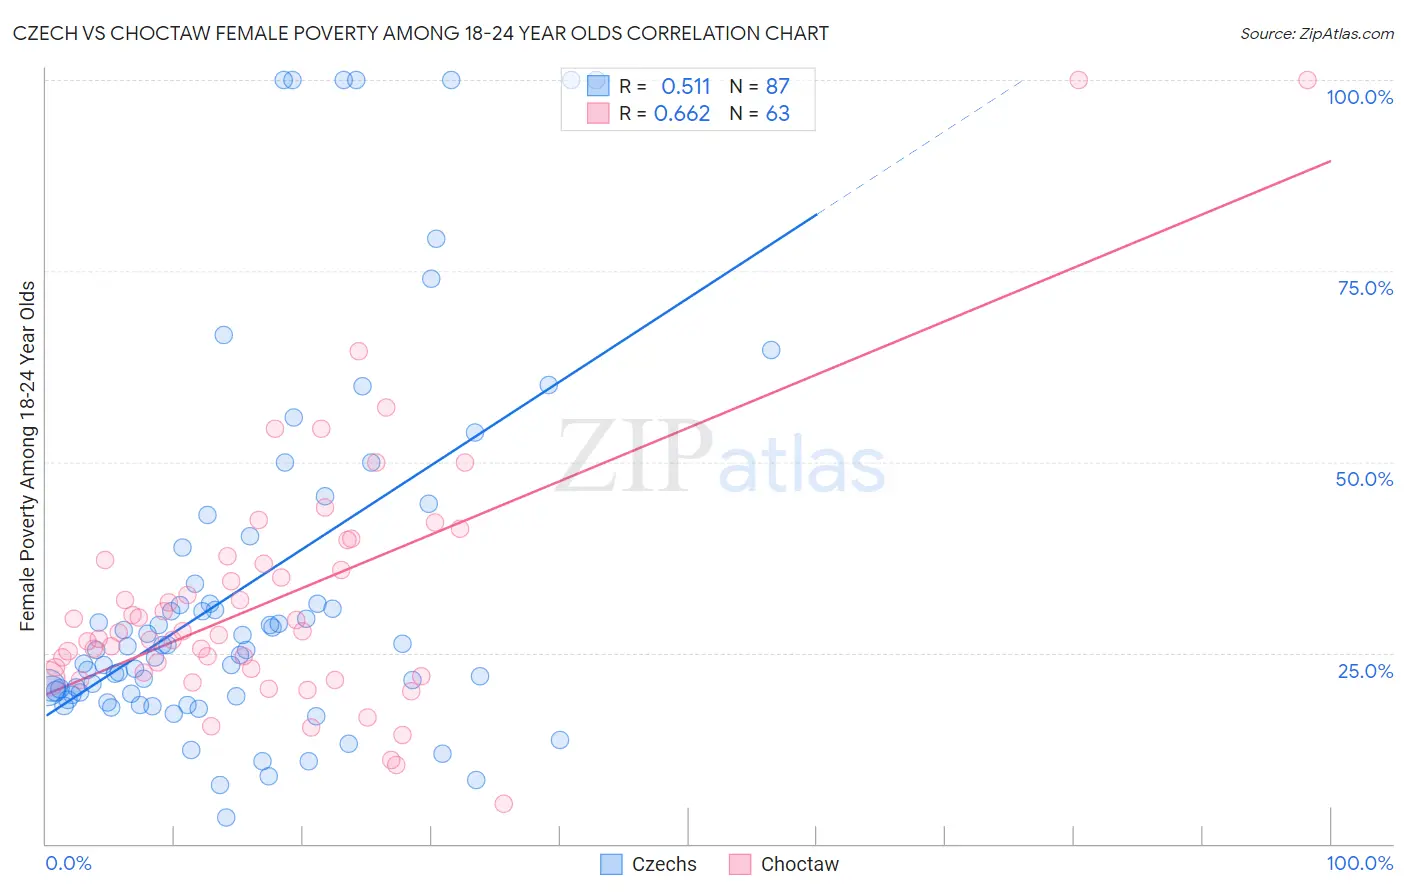 Czech vs Choctaw Female Poverty Among 18-24 Year Olds